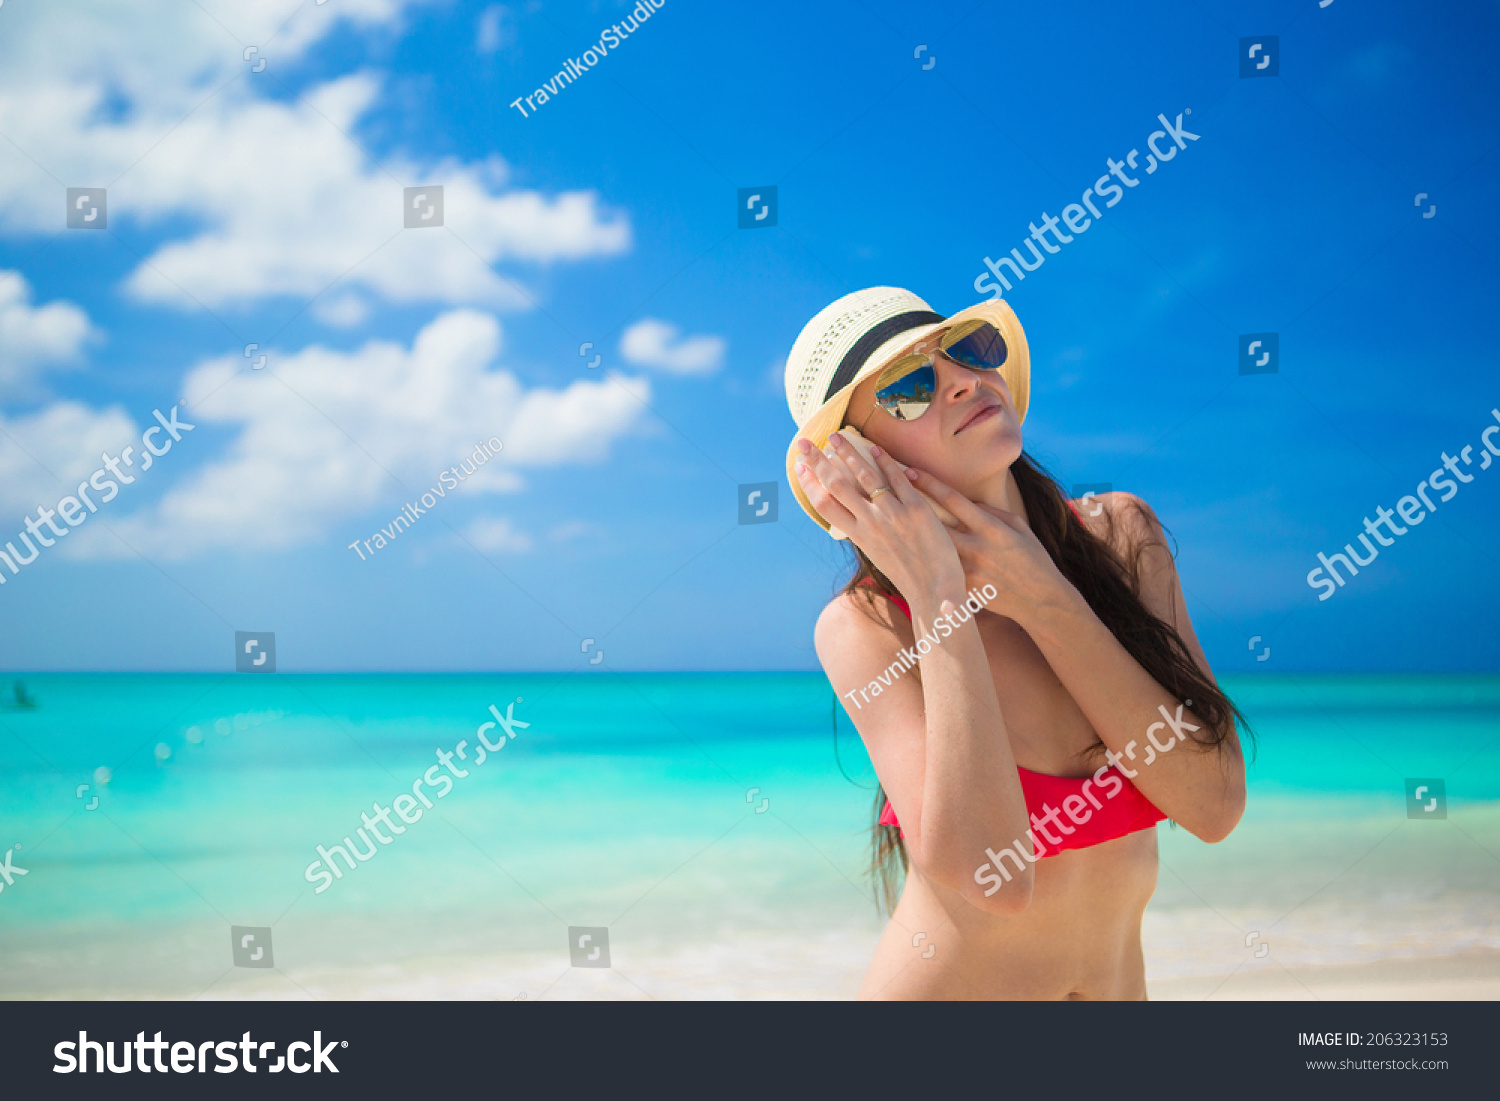 Beautiful girl with seashell in hands at tropical beach #206323153